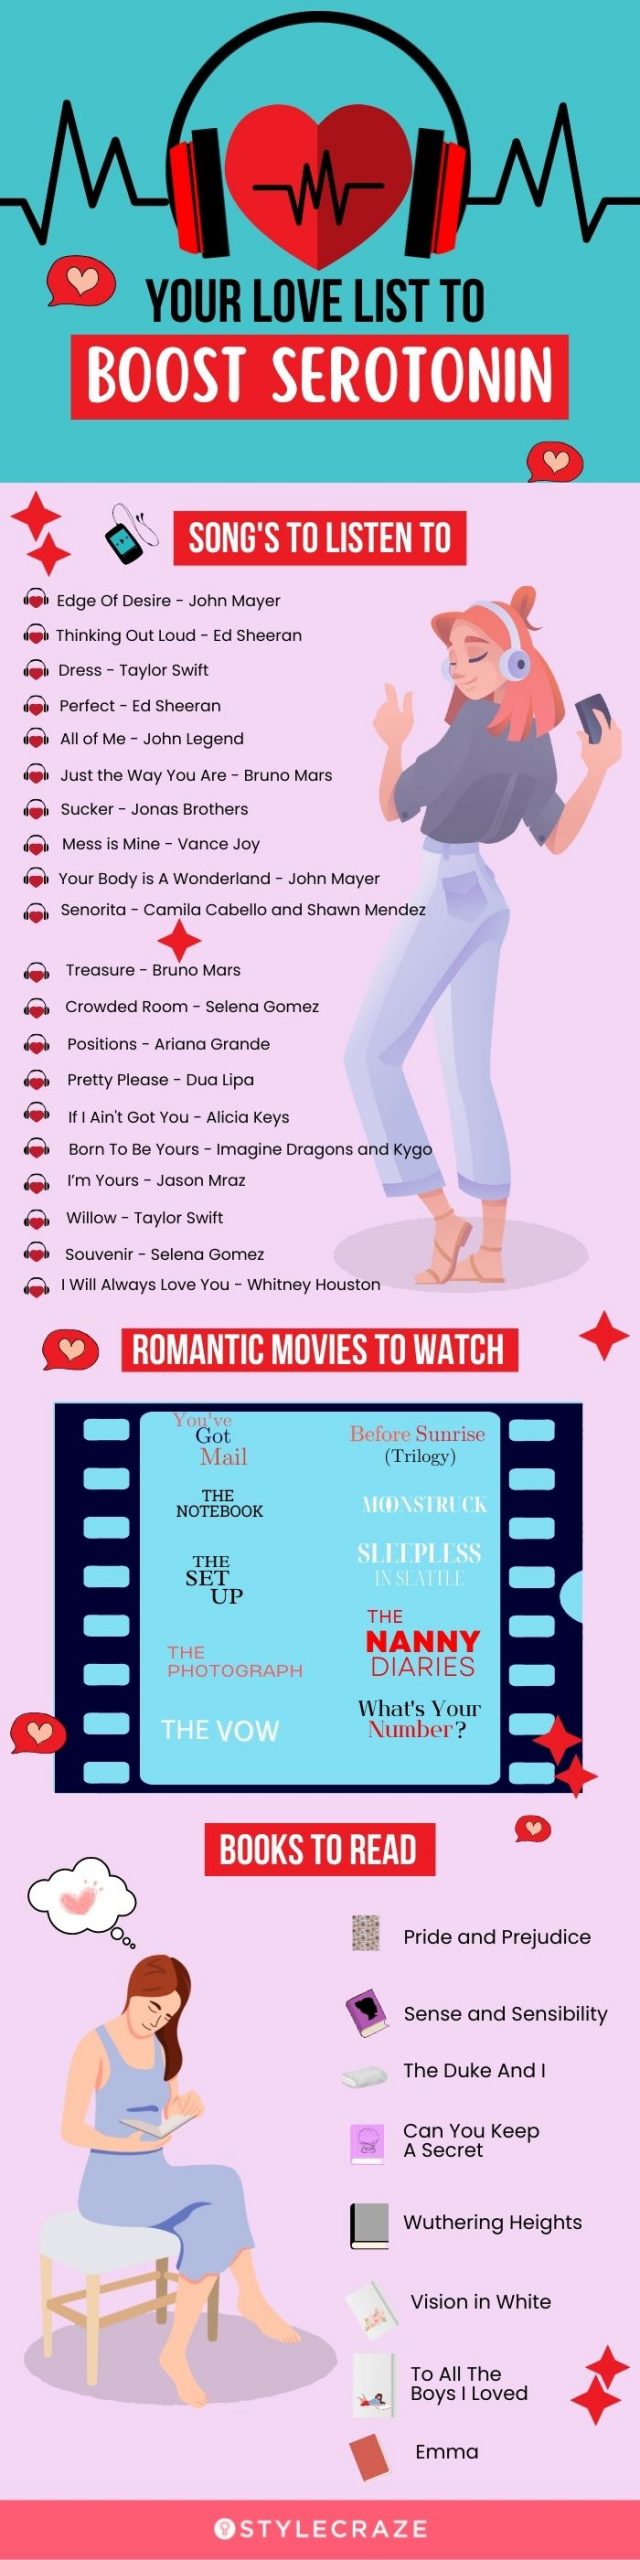 your love list to boost serotonin [infographic]